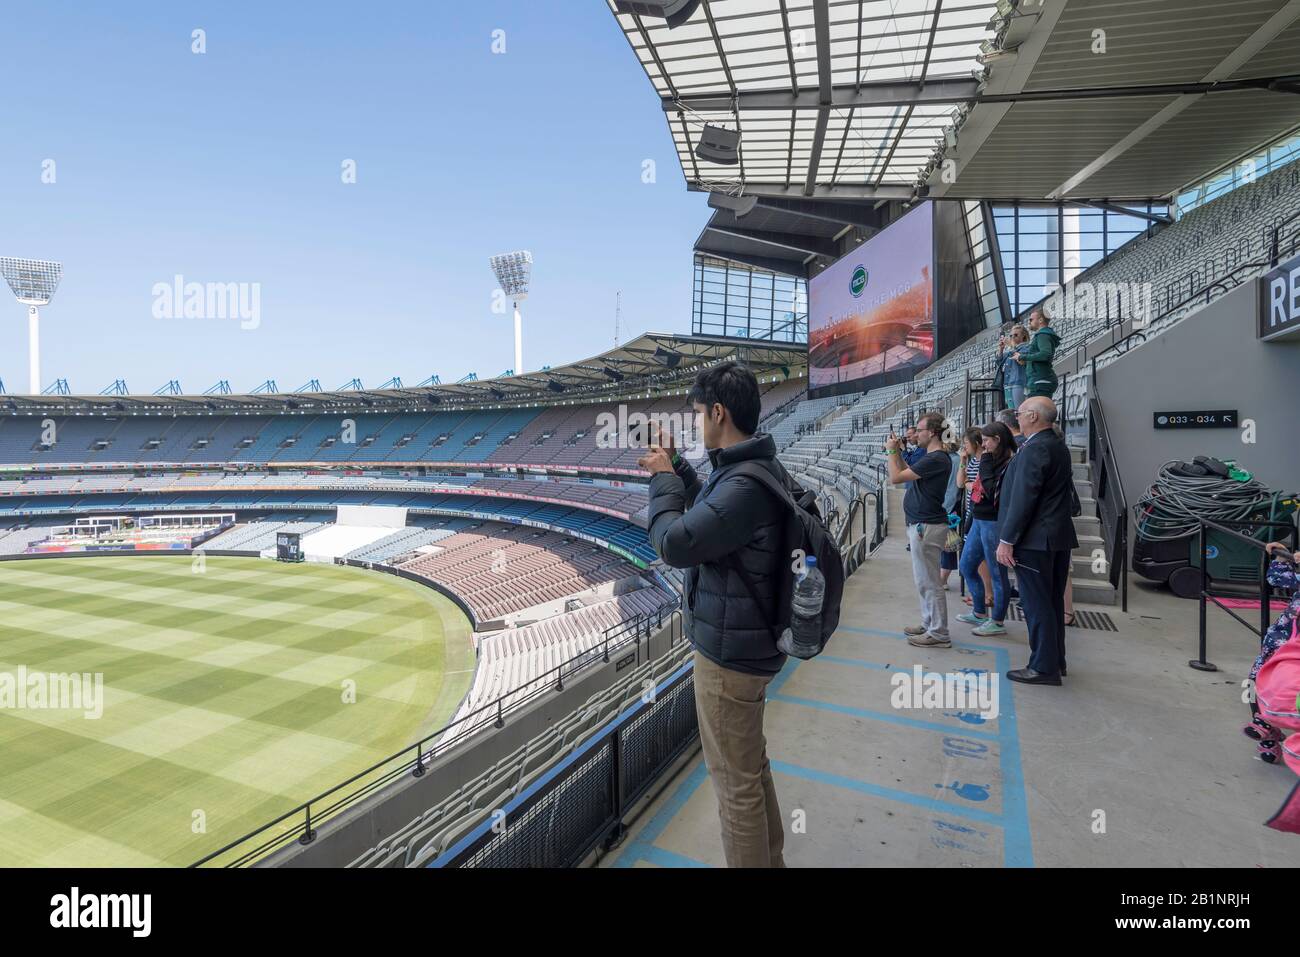 A Man Uses His Phone To Photograph The Pitch Of Melbourne Cricket Ground Mcg In Australia While On A Tour Of The Stadium Stock Photo Alamy